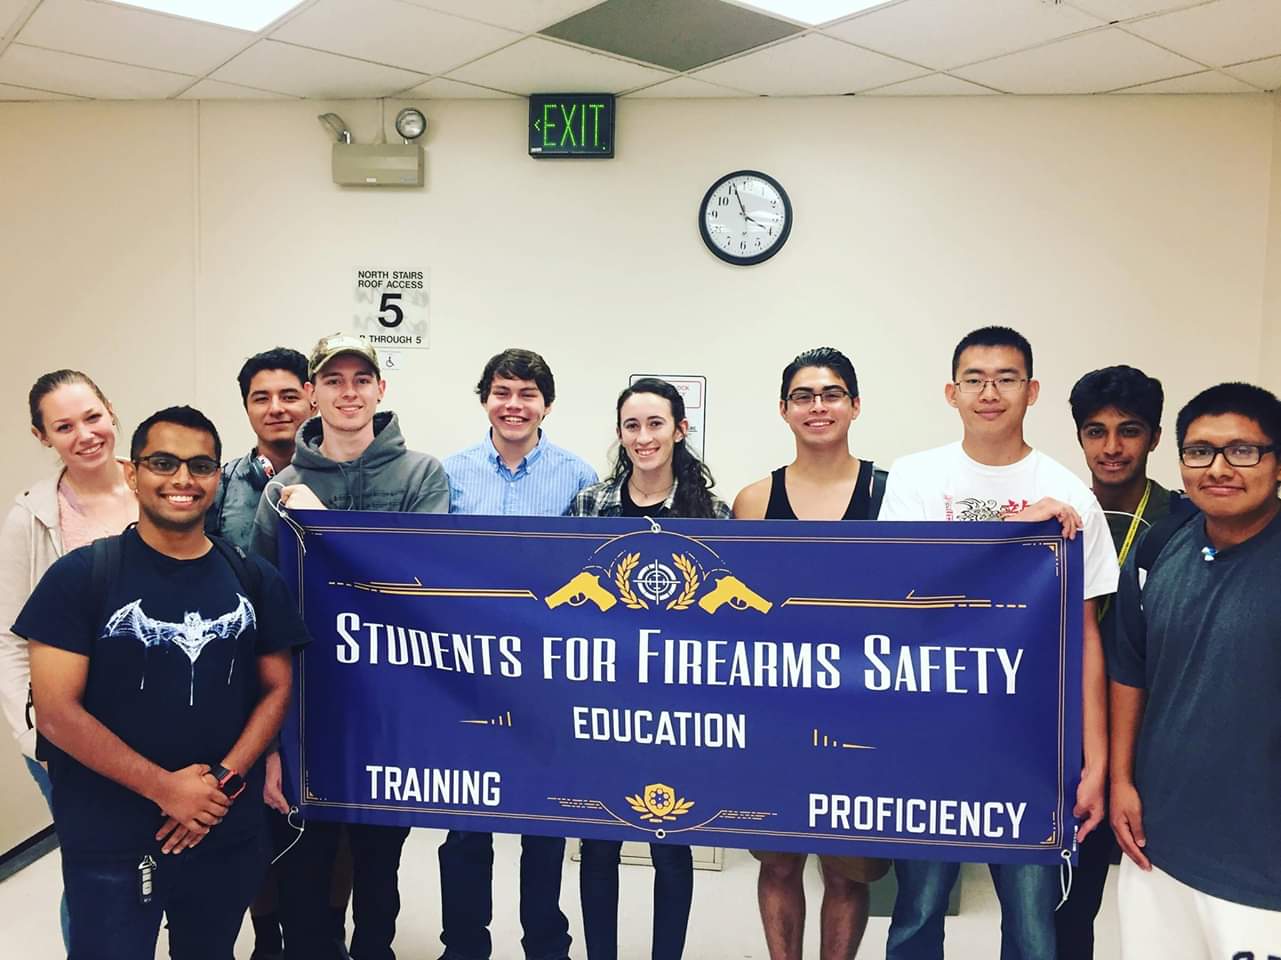 Students for Firearms Safety (SFFS)